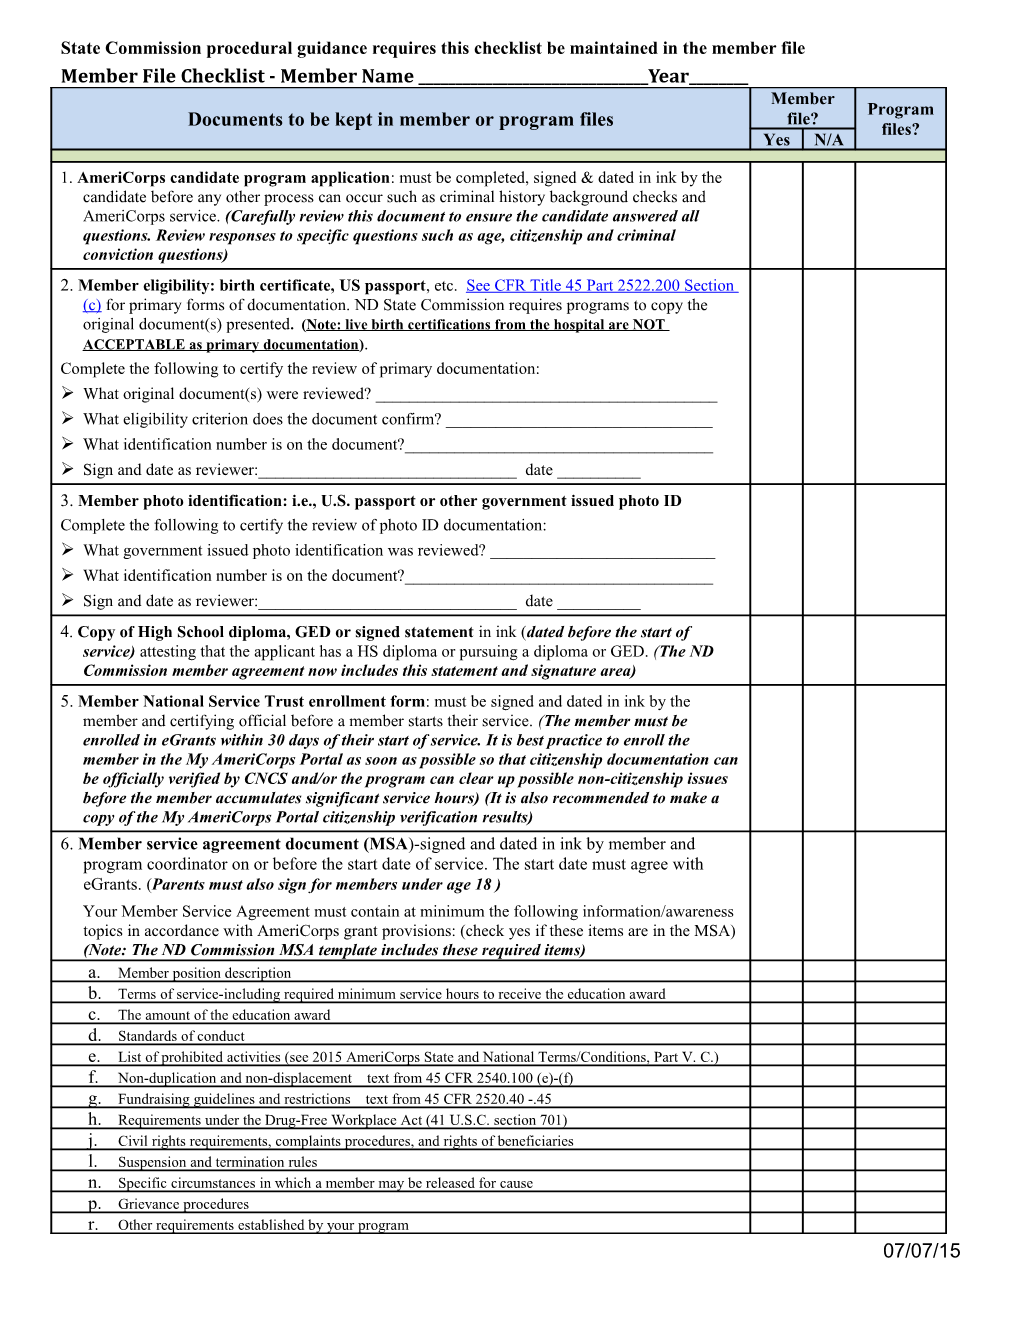 State Commission Procedural Guidance Requires This Checklist Be Maintainedin the Member File